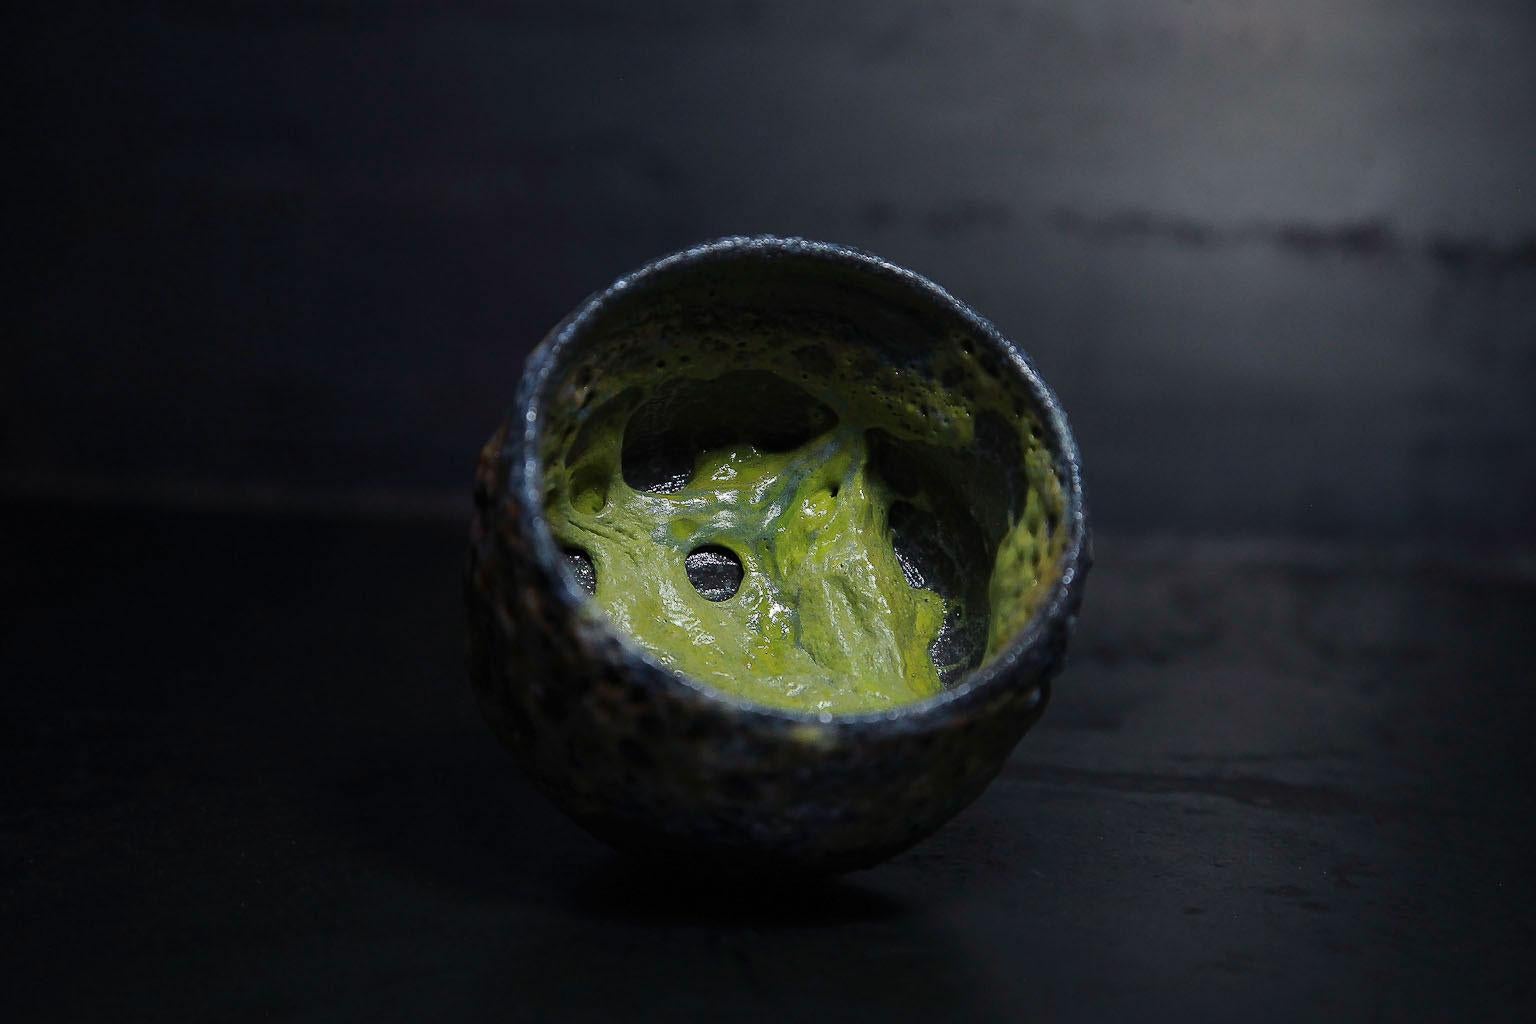 wheelthrown ceramic bowl made of black clay with slime in the inner
